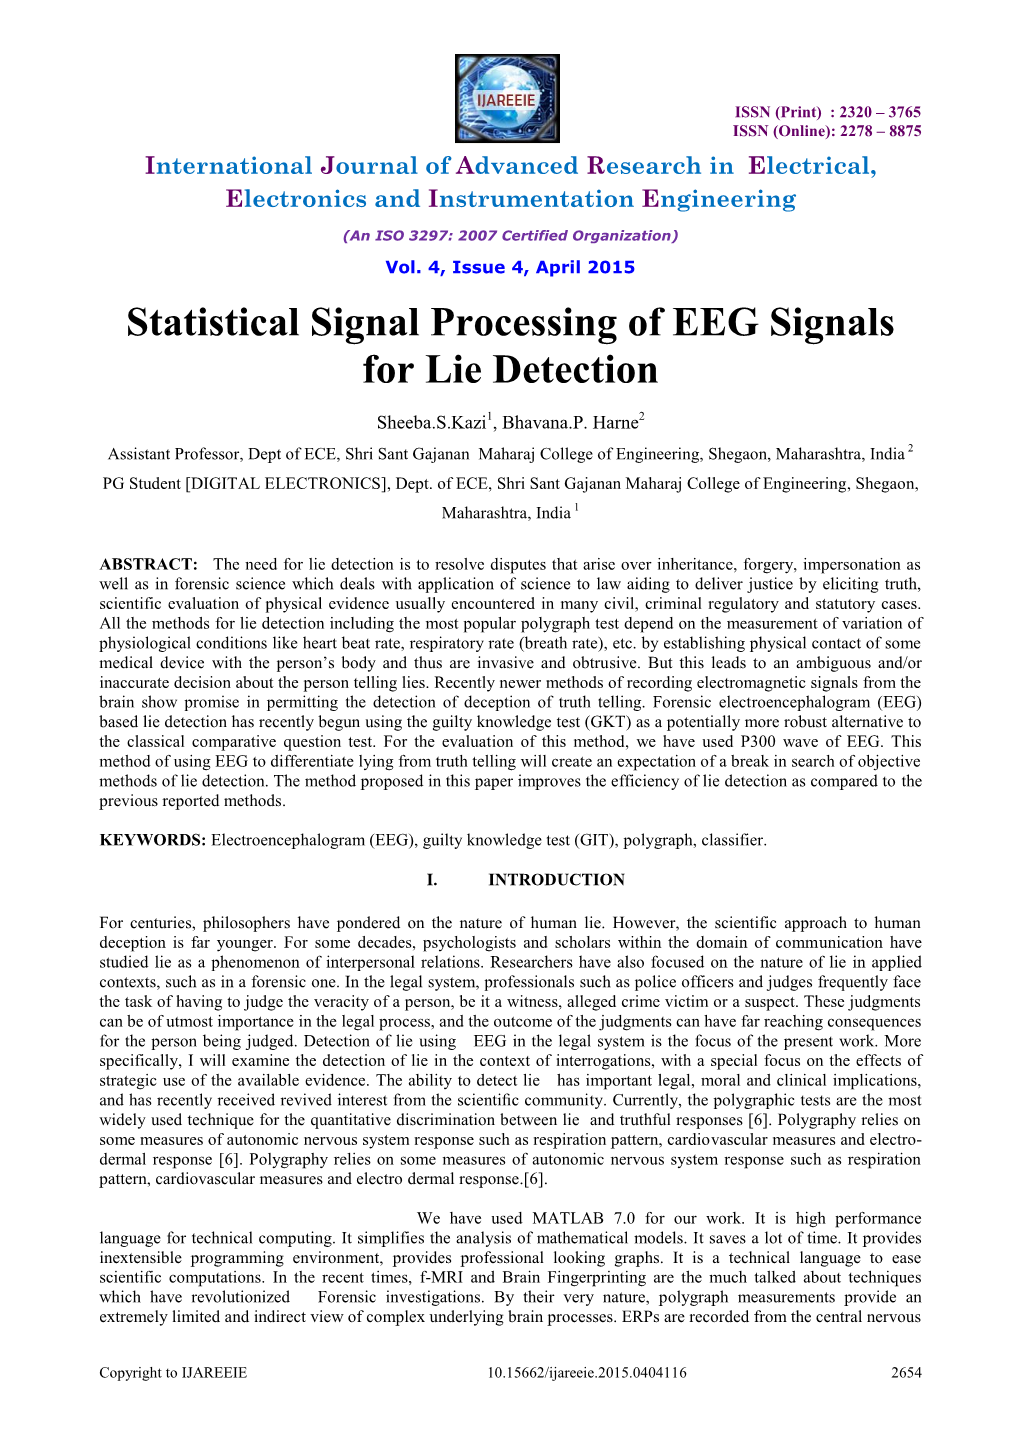 Statistical Signal Processing of EEG Signals for Lie Detection